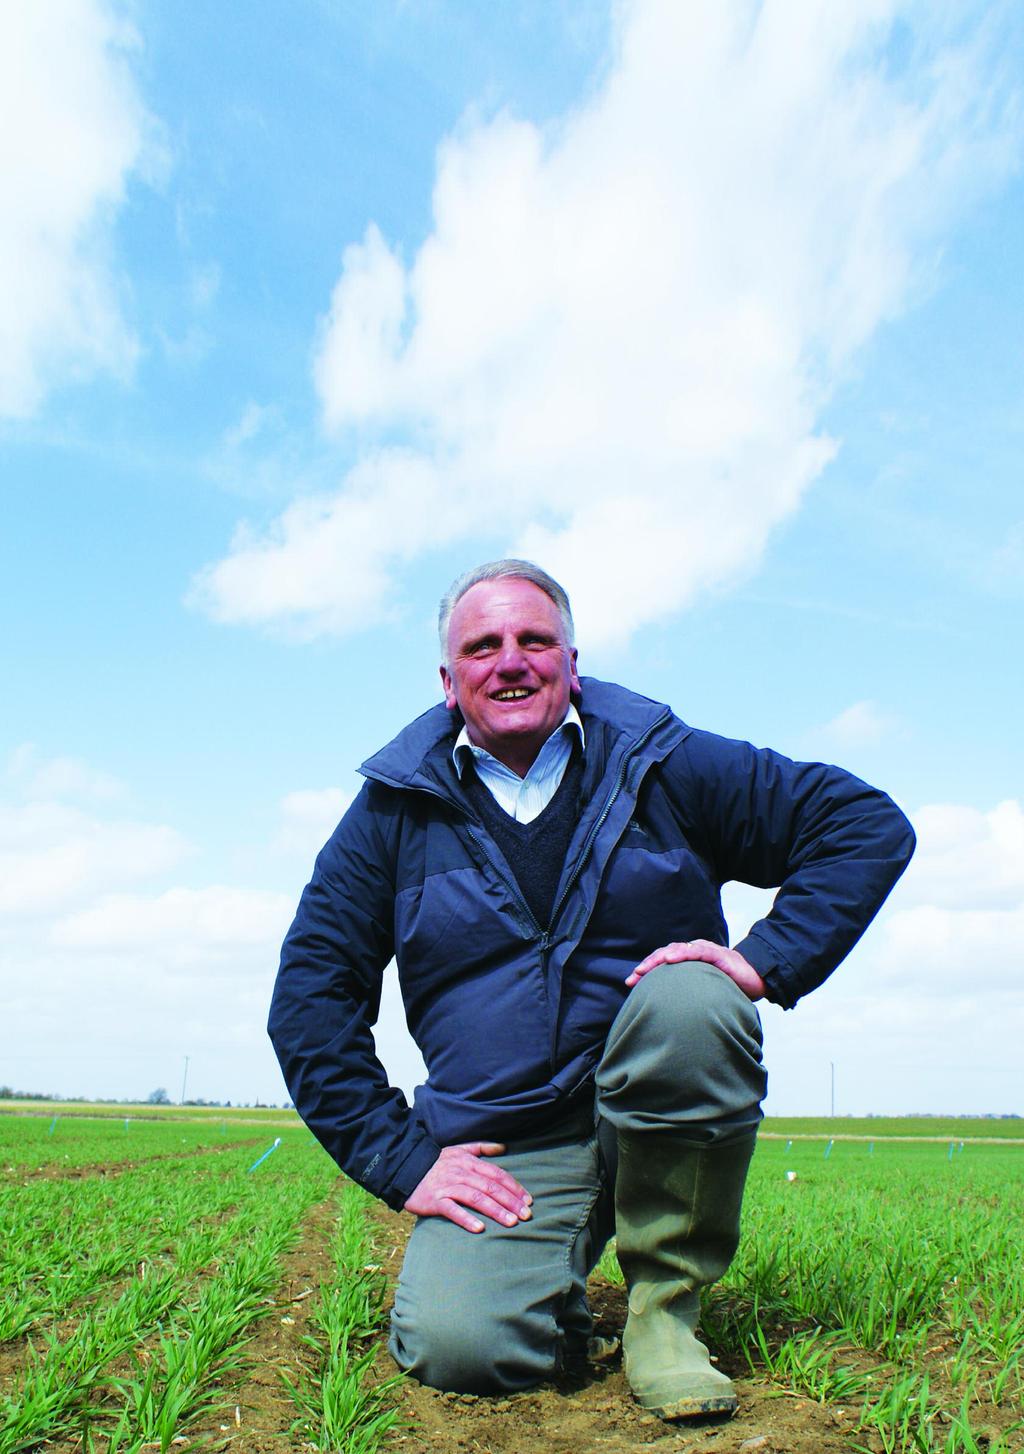 Plots pitched against a blackgrass burden Agrii has the largest network of replicated trials in the UK, but how does the grower benefit?